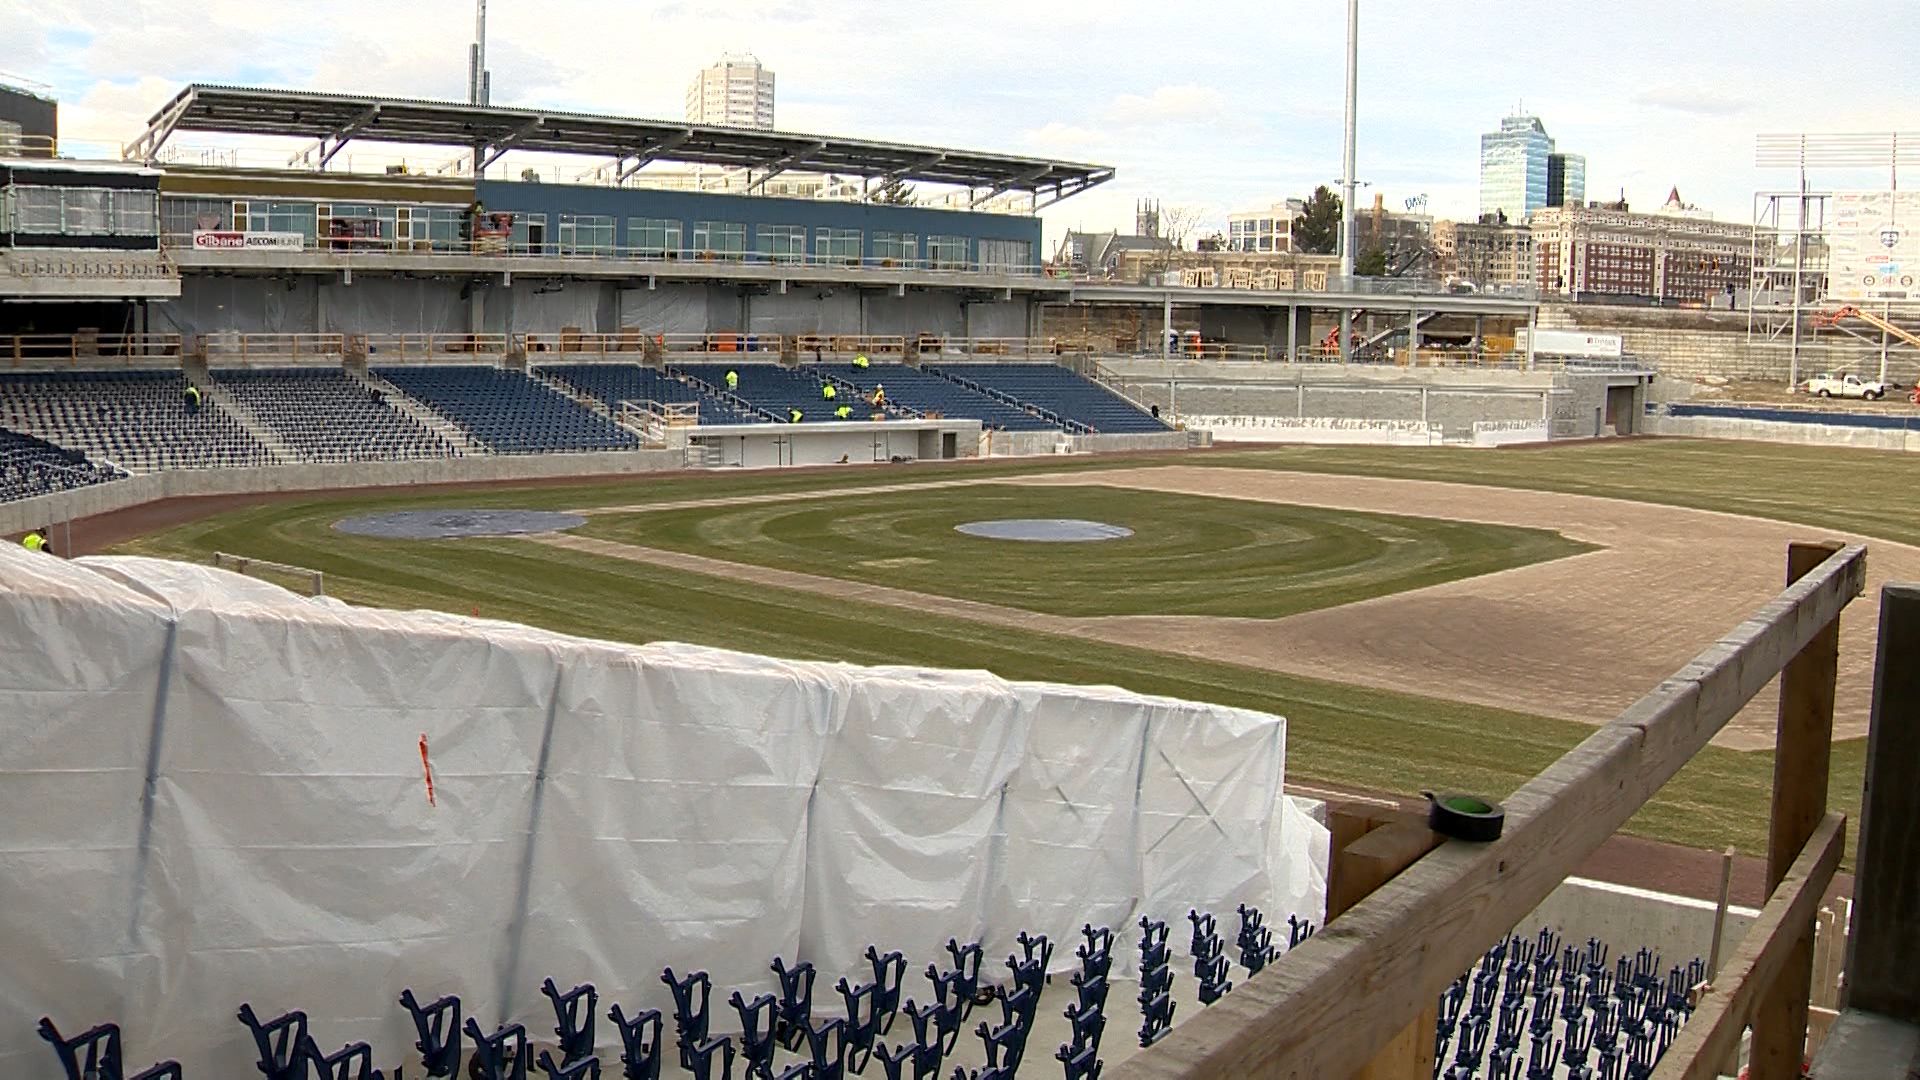 Inside look at ongoing work at Polar Park, home of Worcester Red Sox